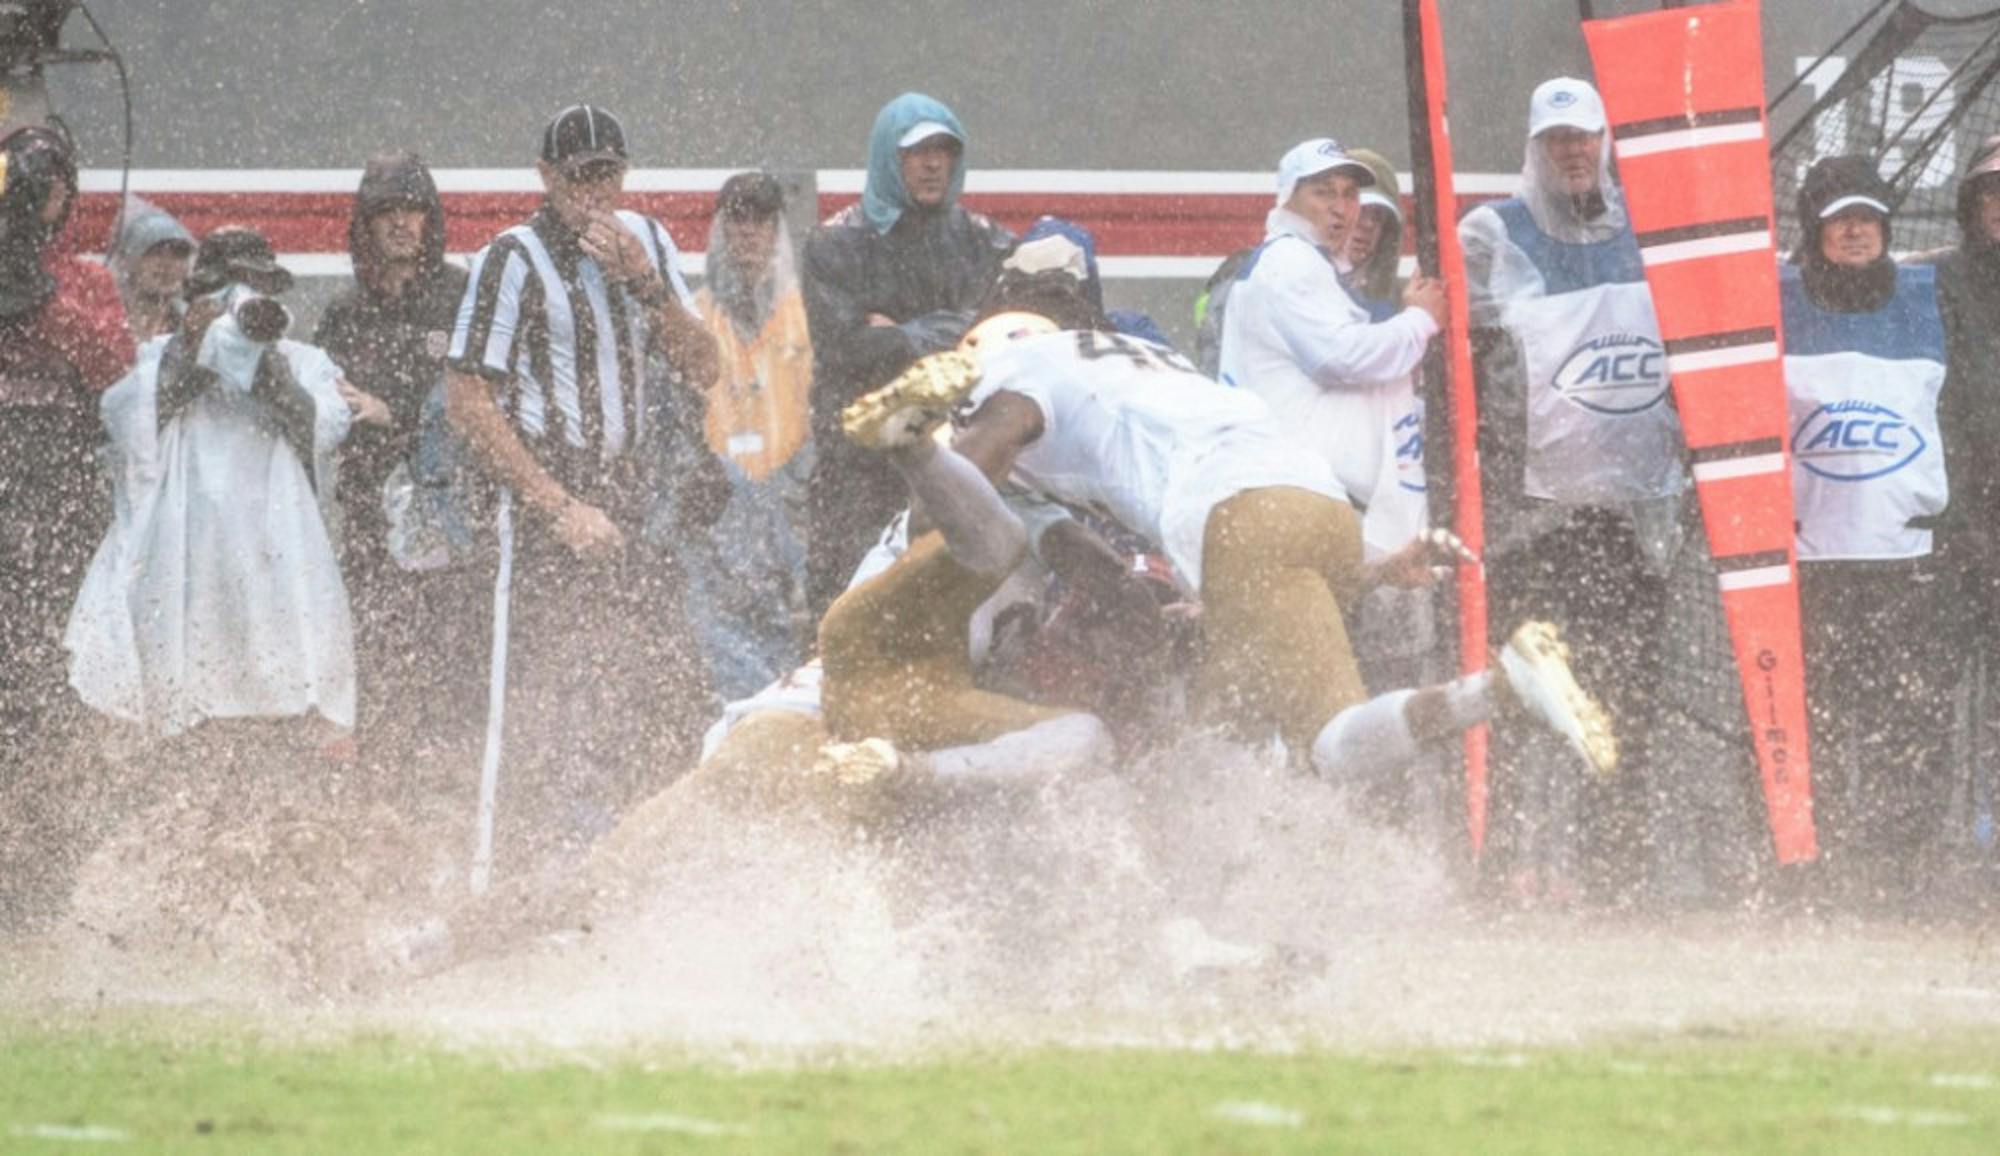 Irish freshman defensive lineman Julian Okwara, top, joins freshman cornerback Julian Love, middle with cleats up, and sophomore running back Dexter Williams in tackling the N.C. State kick returner Saturday in the Irish loss. This was a common sight throughout the day as players landed in puddles or slid for five yards after falling or diving.